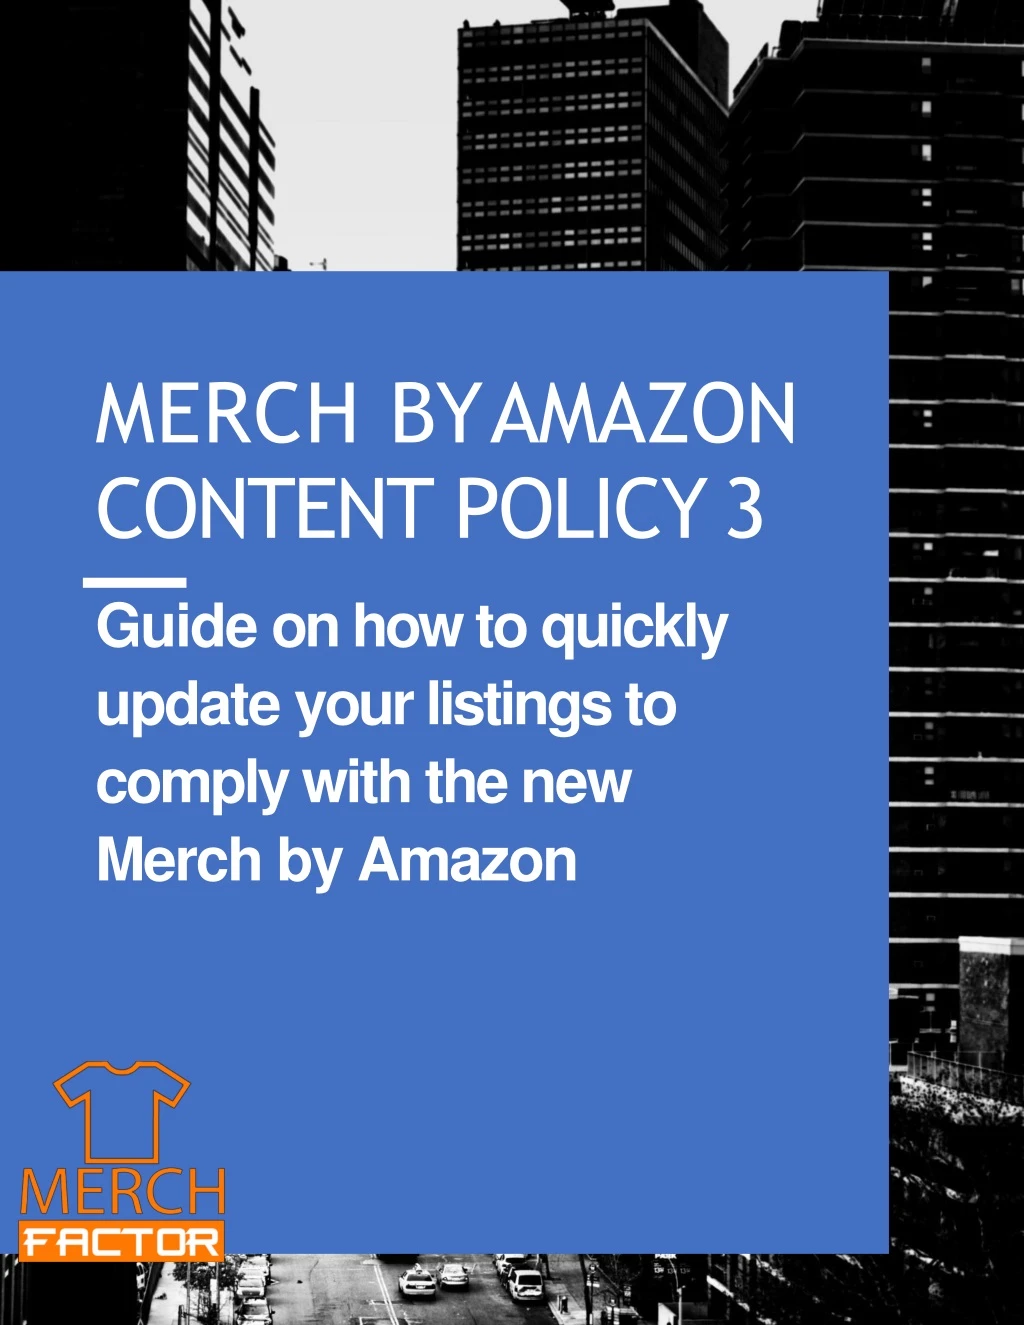 merch by amazon content policy 3